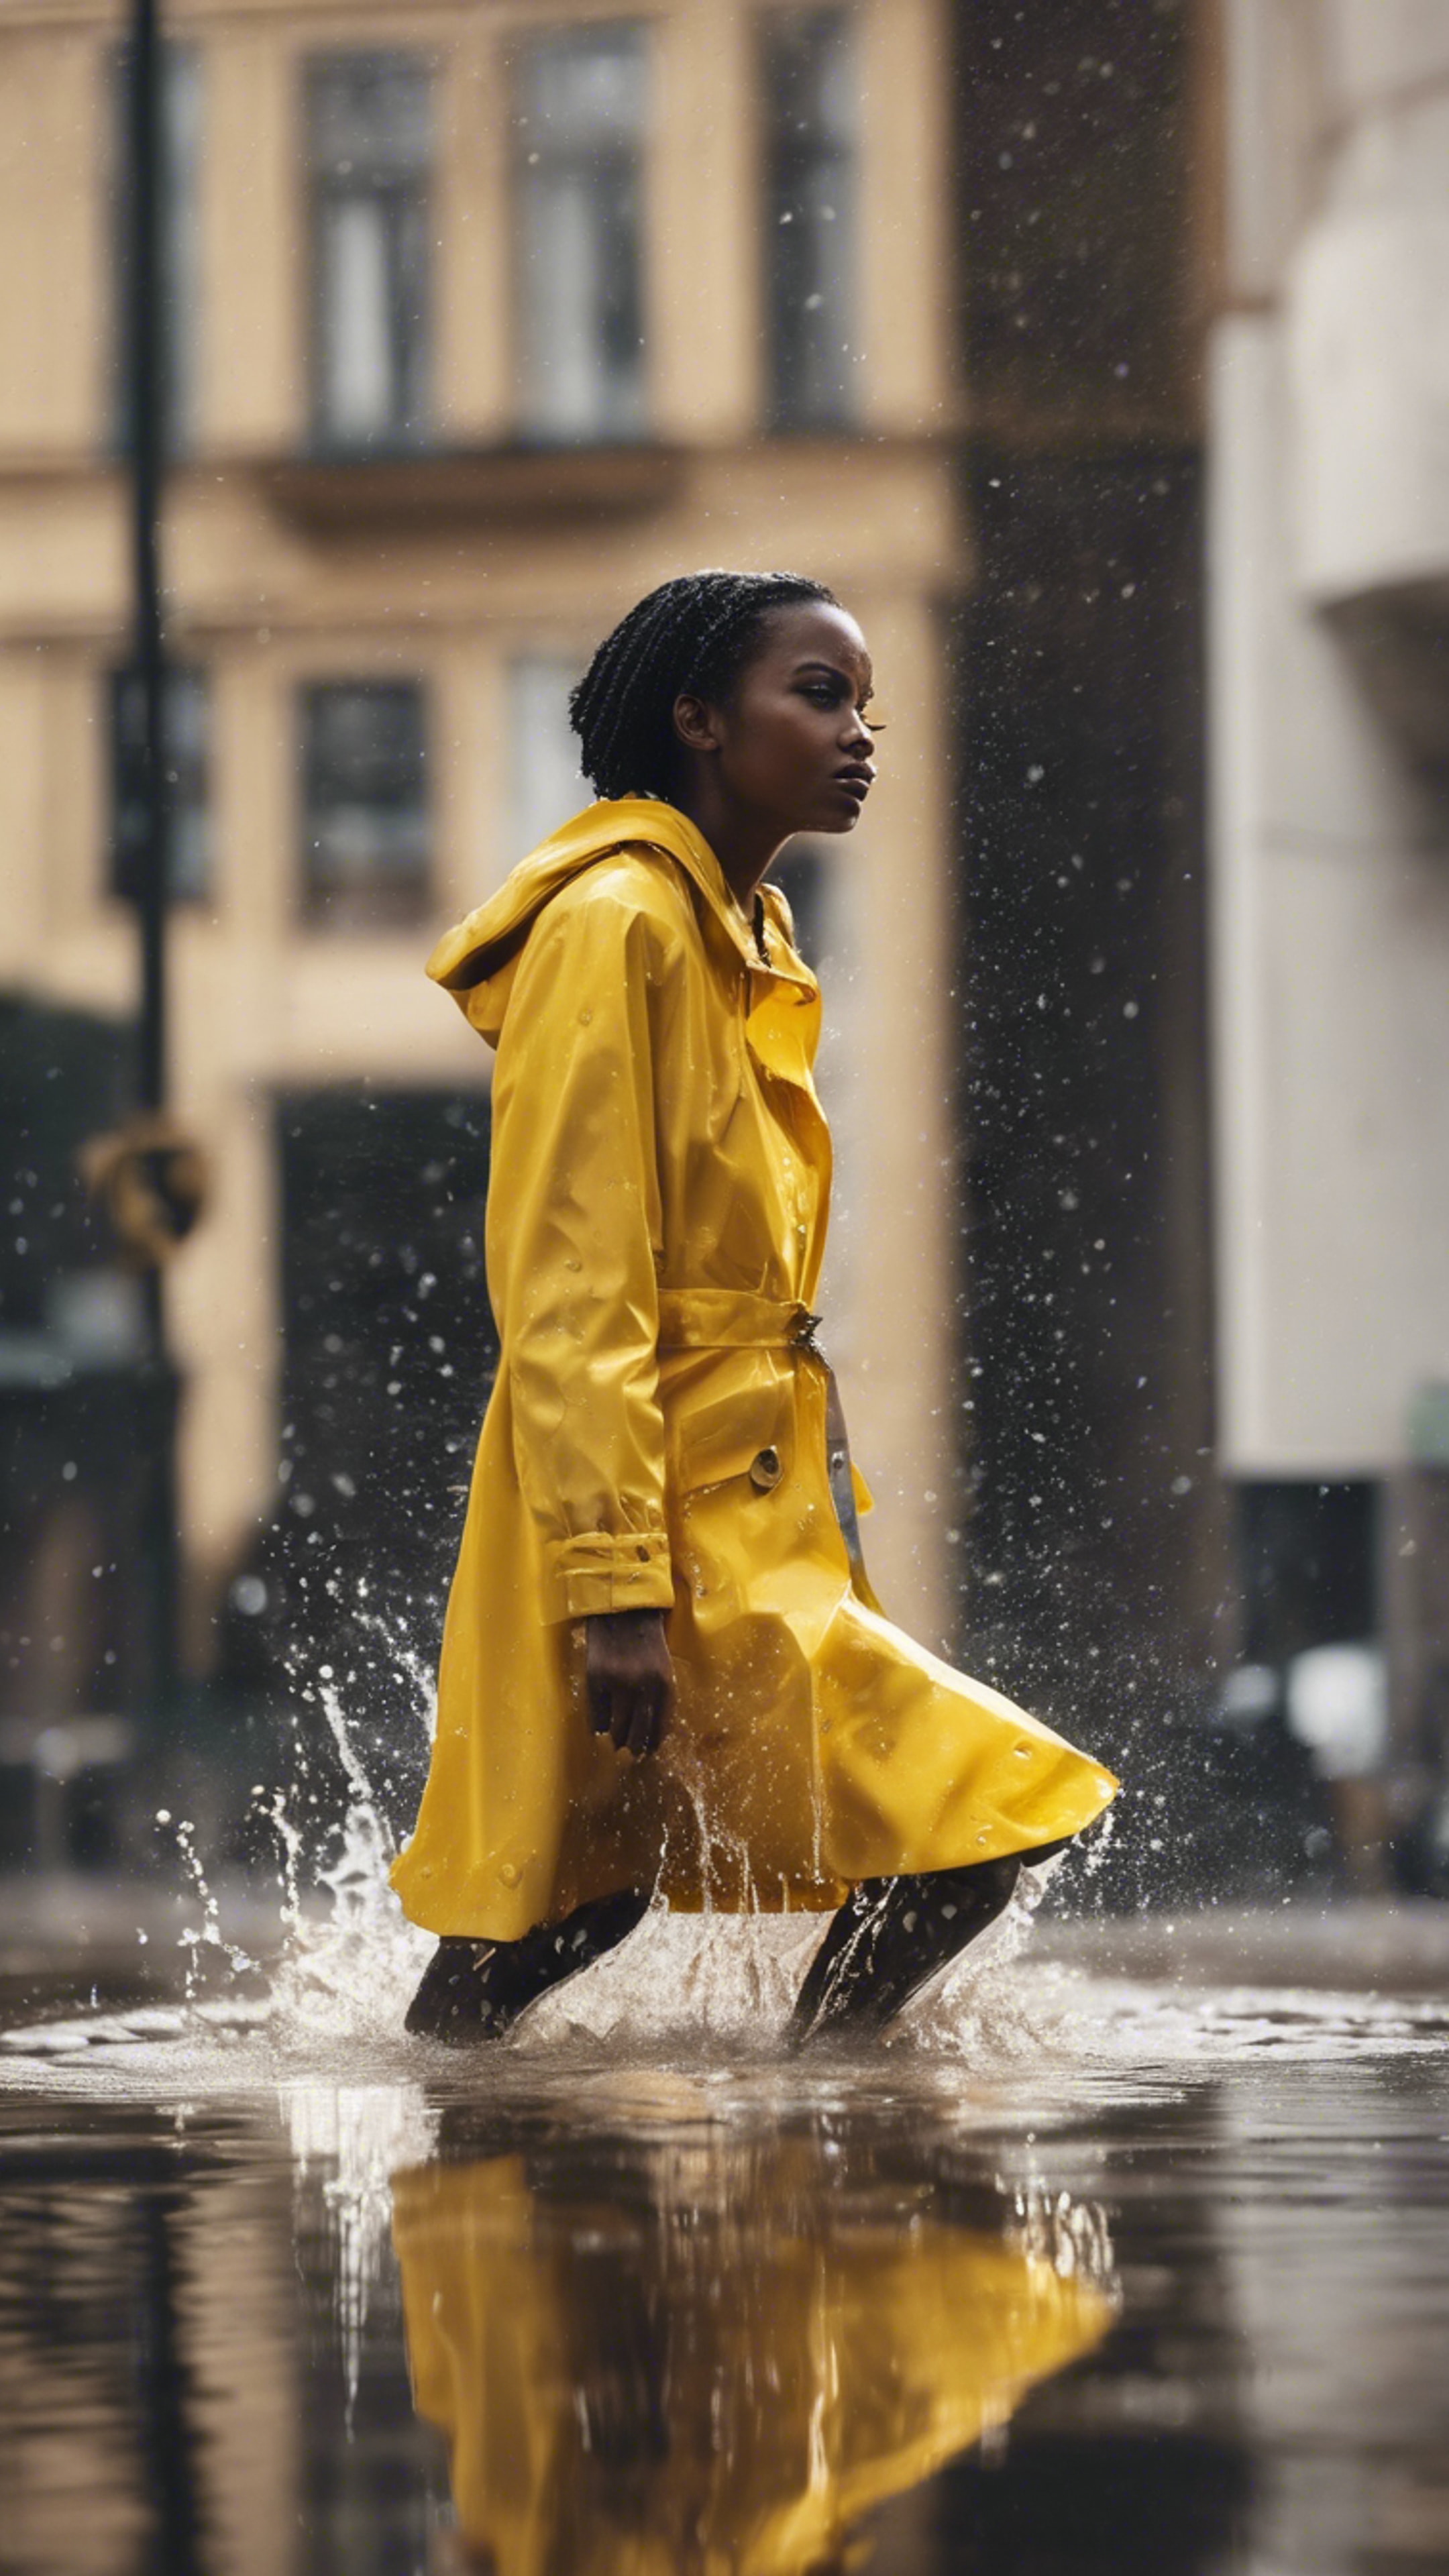 A black girl in a bright yellow raincoat splashing water in puddles after a heavy rain.壁紙[a80398e4c066404db875]